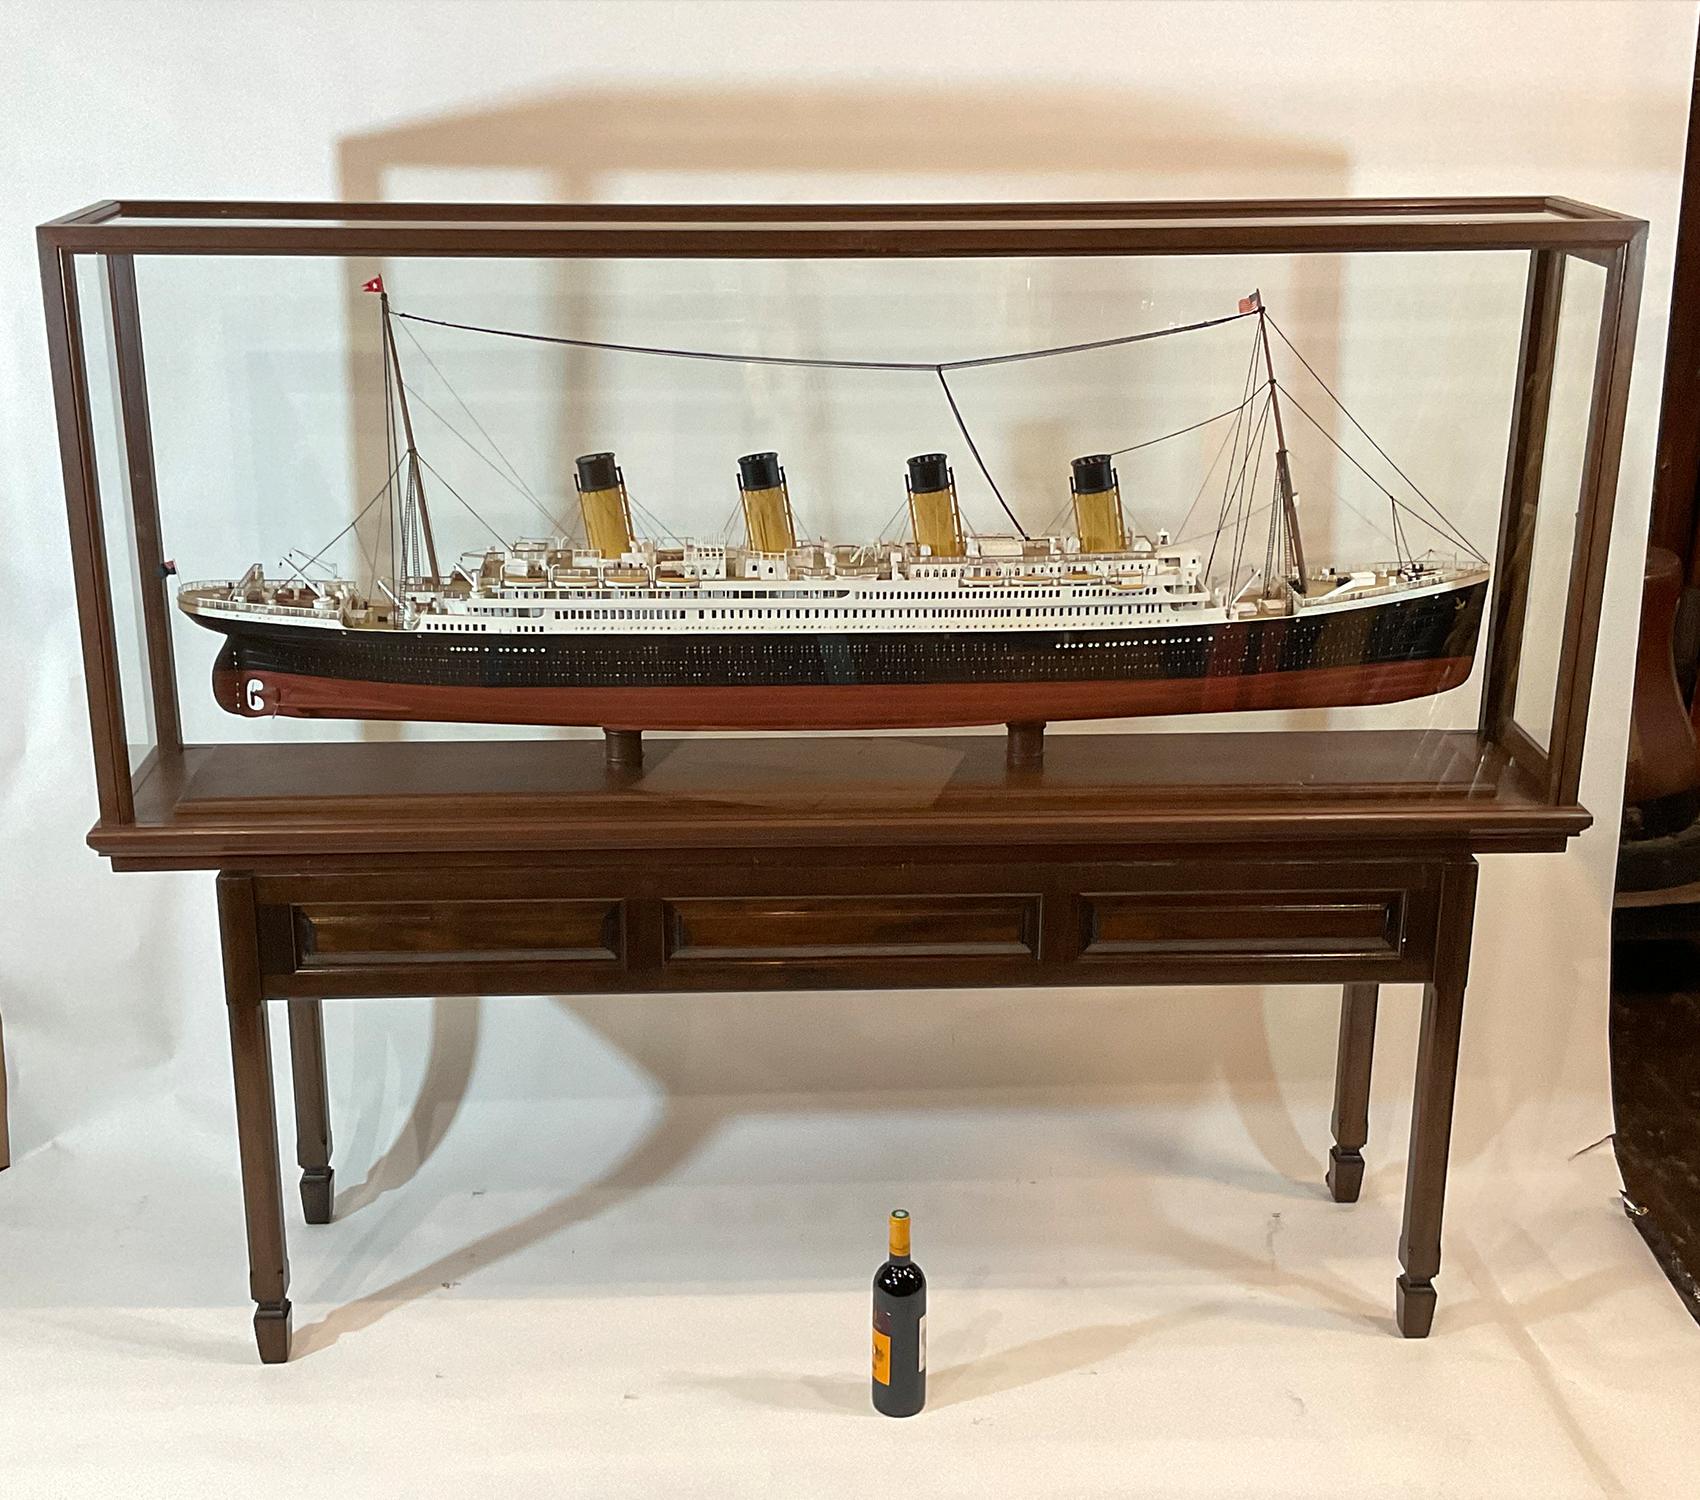 North American Six Foot Model of the Titanic For Sale